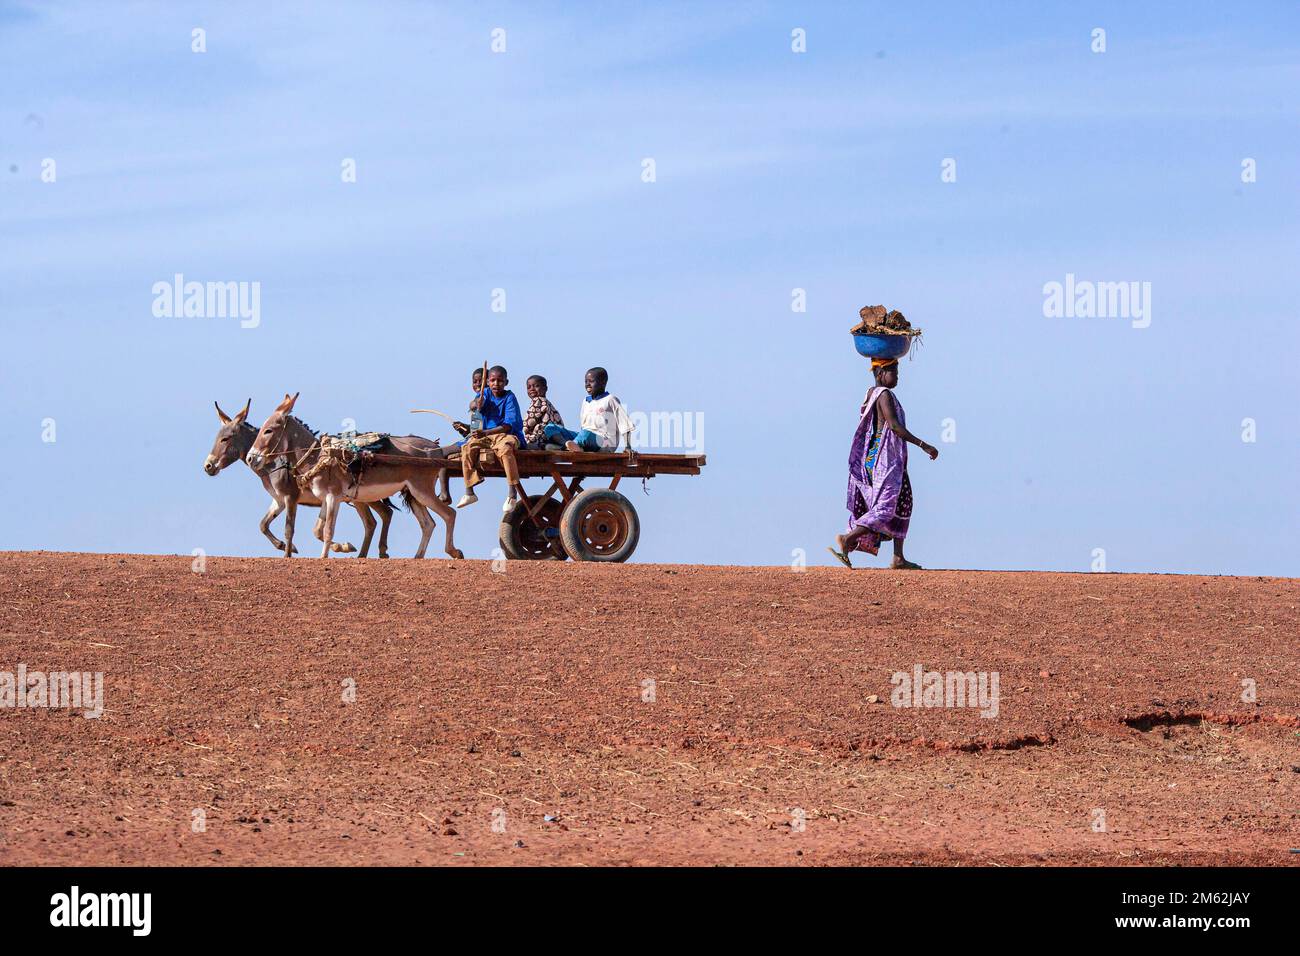 children riding a cart with a horse and african woman wiht things on head passing. Stock Photo